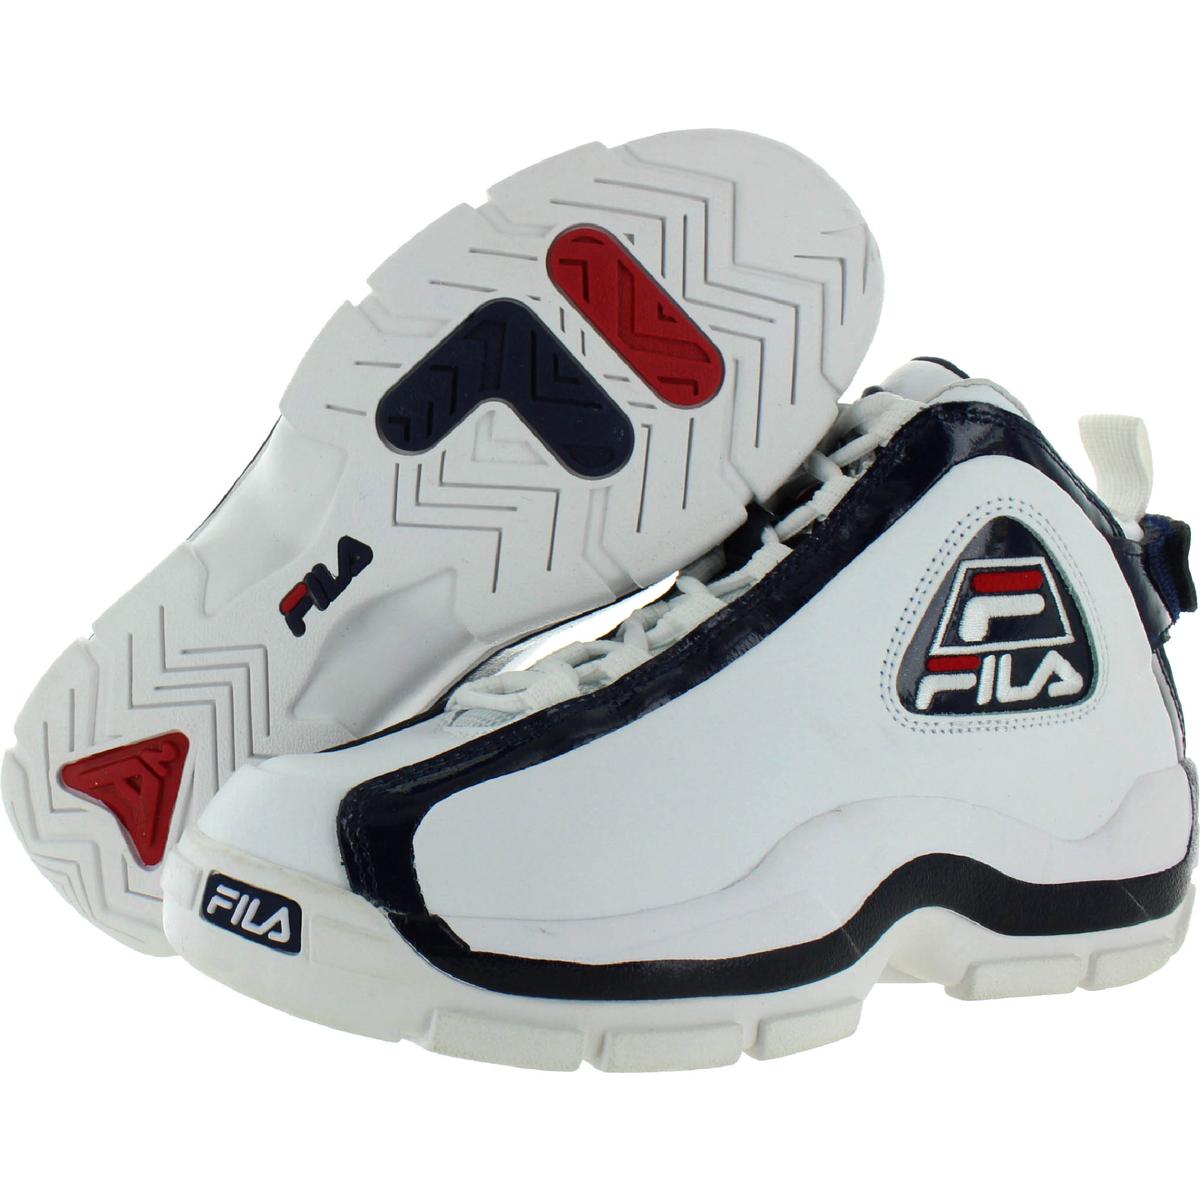 Fila Mens 96 White Leather Basketball Shoes Sneakers 8.5 Medium (D ...